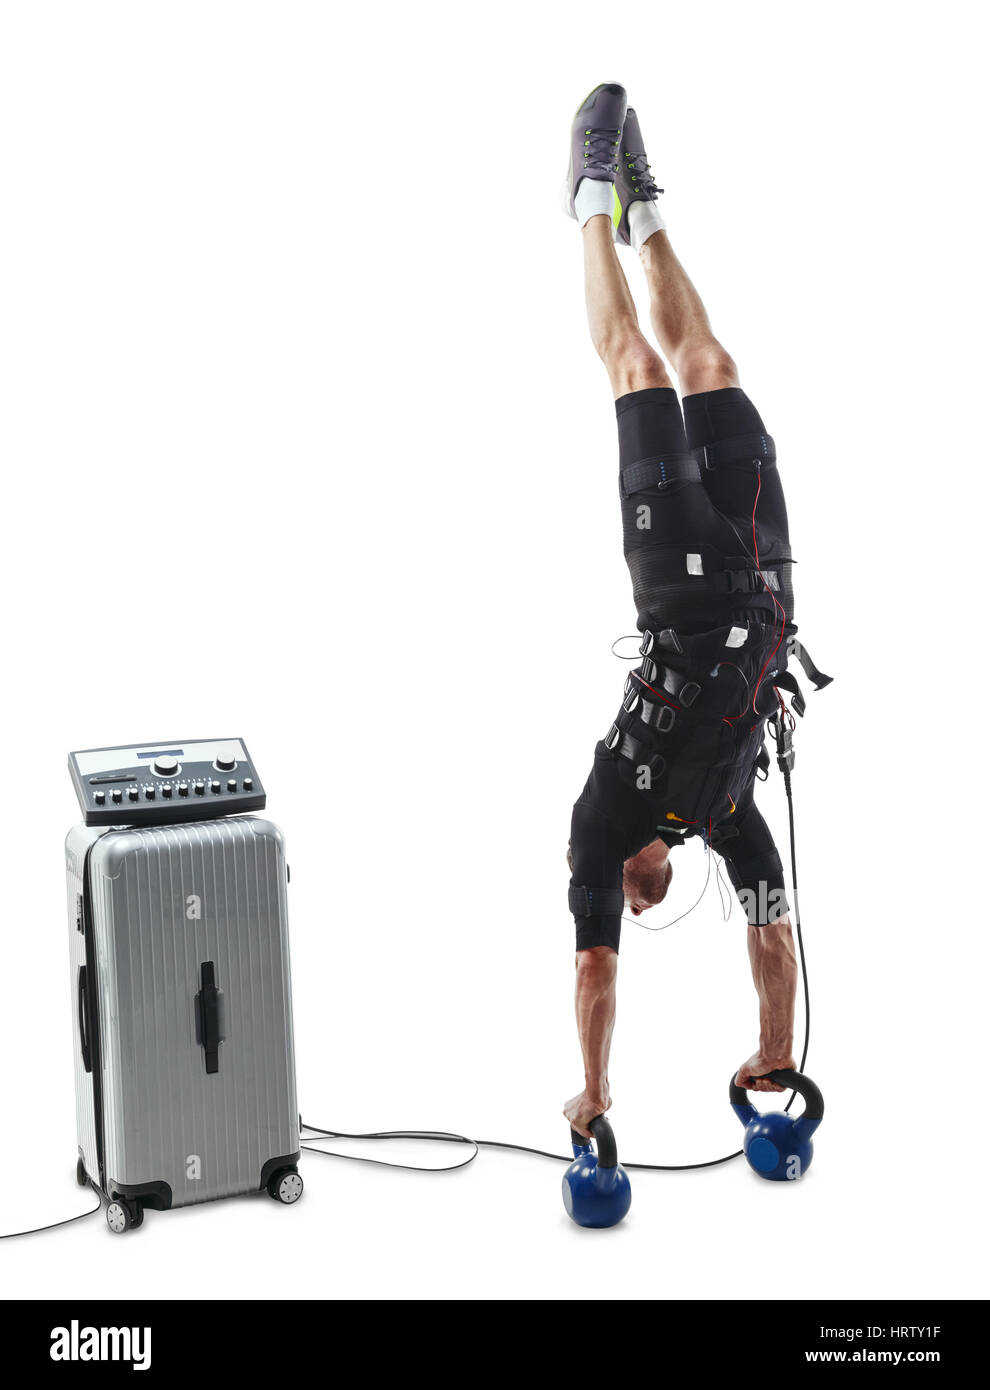 Fitness athlete in electrical muscular stimulation suit doing a vertical handstand upside down on dumbbells. Isolated on white background. Stock Photo